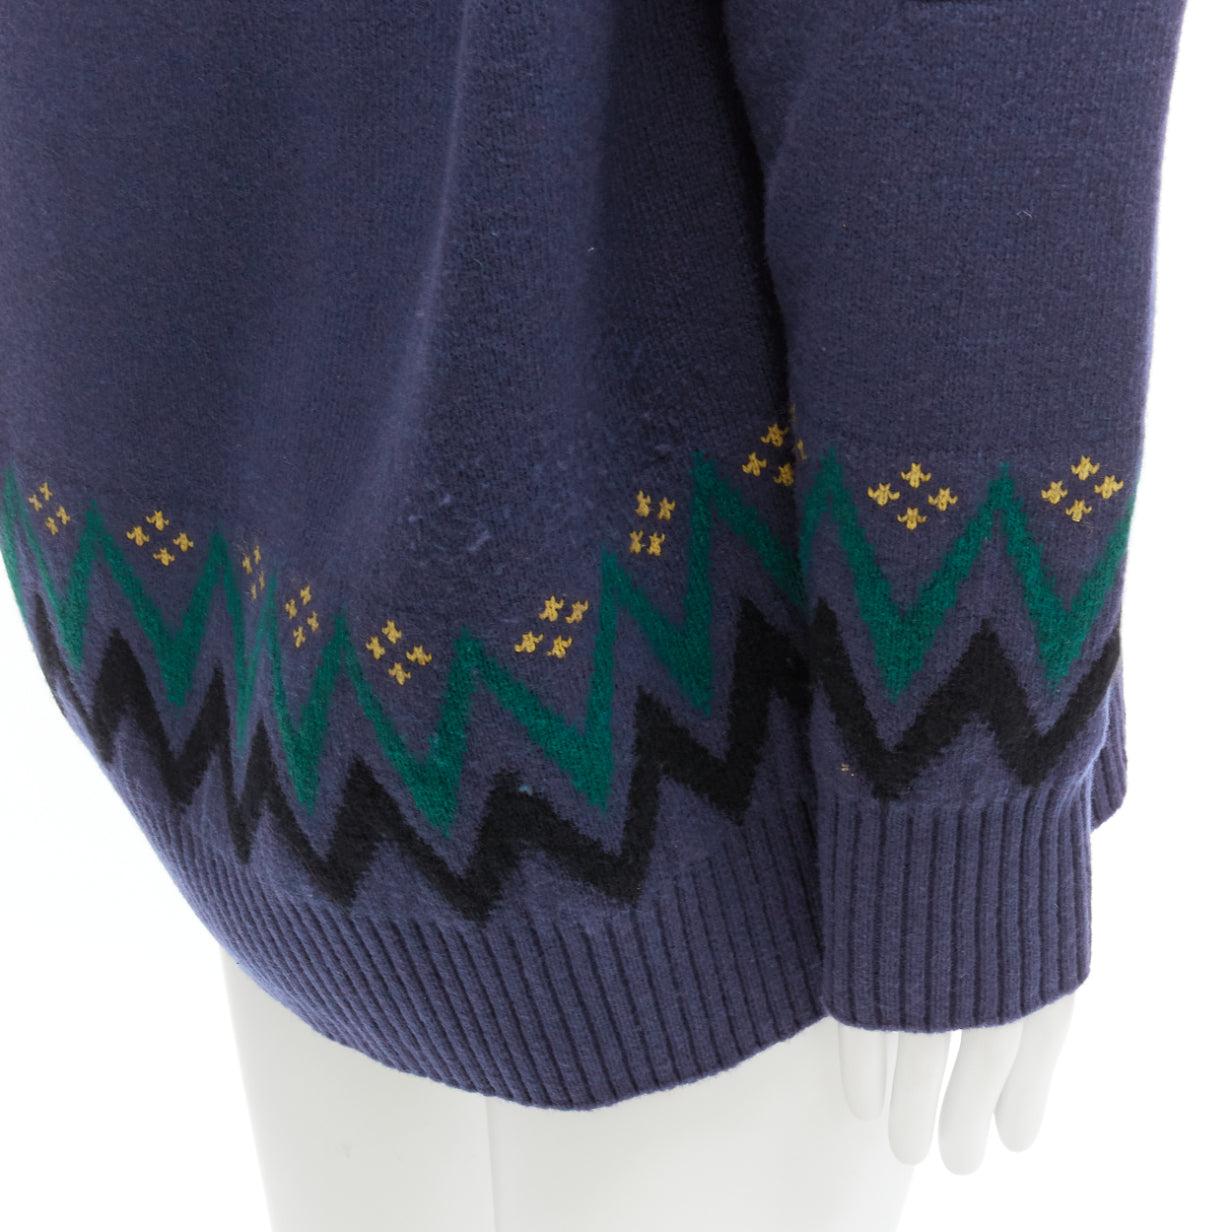 SACAI 2018 navy cotton blend fairisle knit sweater hyrid hoodie JP3 L
Reference: CAWG/A00300
Brand: Sacai
Designer: Chitose Abe
Collection: 2018
Material: Cotton, Blend
Color: Navy, Multicolour
Pattern: Fair Isle
Closure: Pullover
Extra Details: